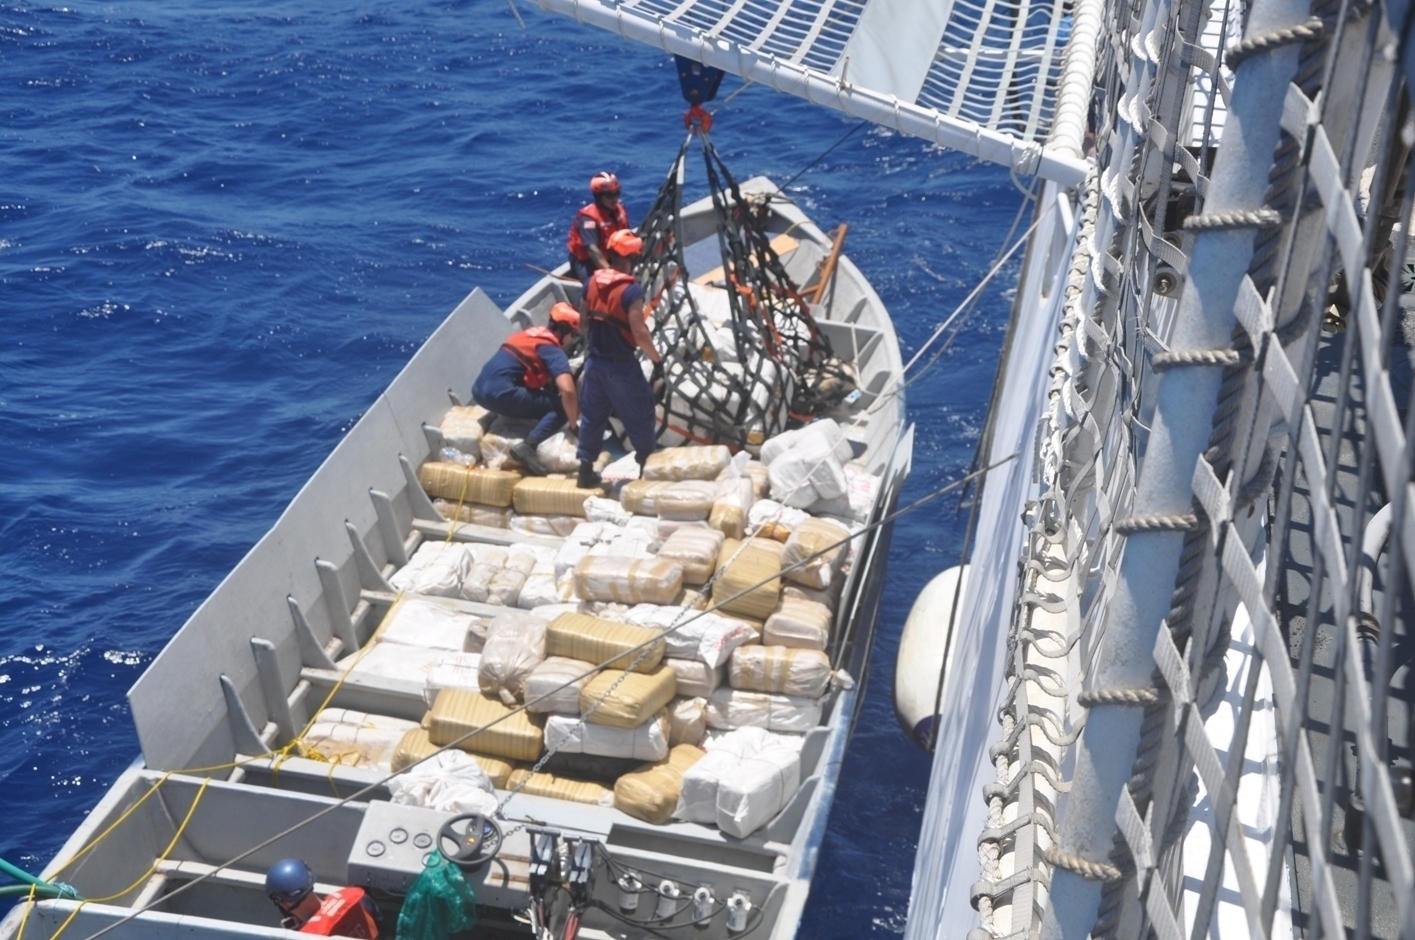 Coast Guardsmen from the Coast Guard Cutter Stratton from Alameda, Calif., unload narcotics from a smuggling vessel intercepted by the crew in the Eastern Pacific Ocean July 30, 2014. US Coast Guard Photo